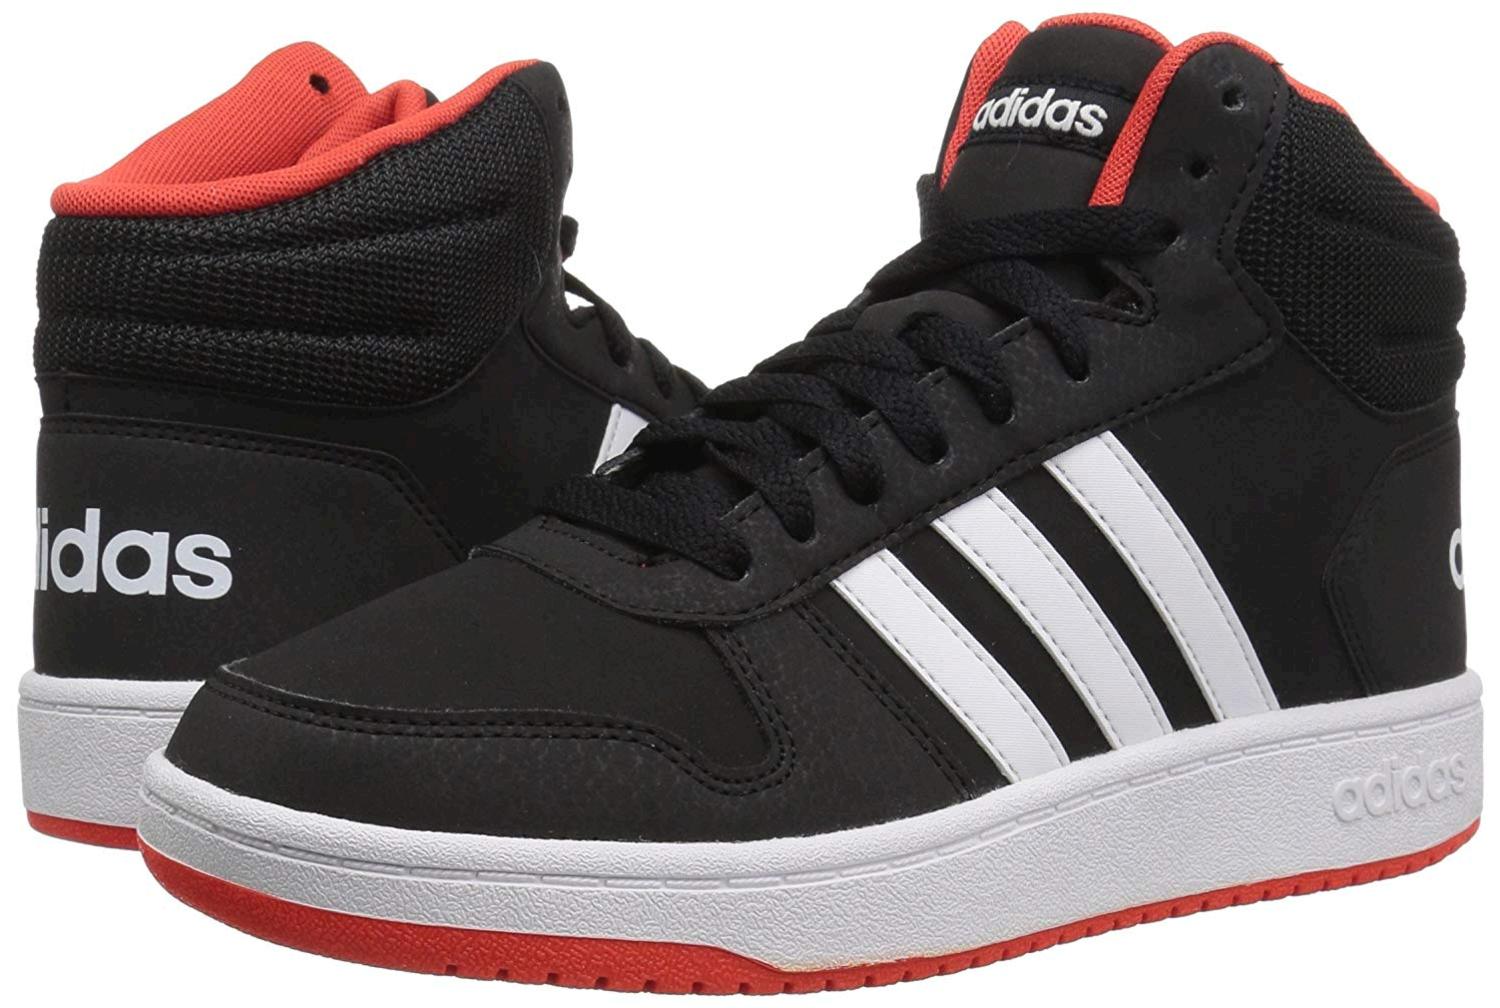 Adidas Children Shoes Hoops Mid 2.01, Black/White/Red, Size 6.5 rjUW | eBay